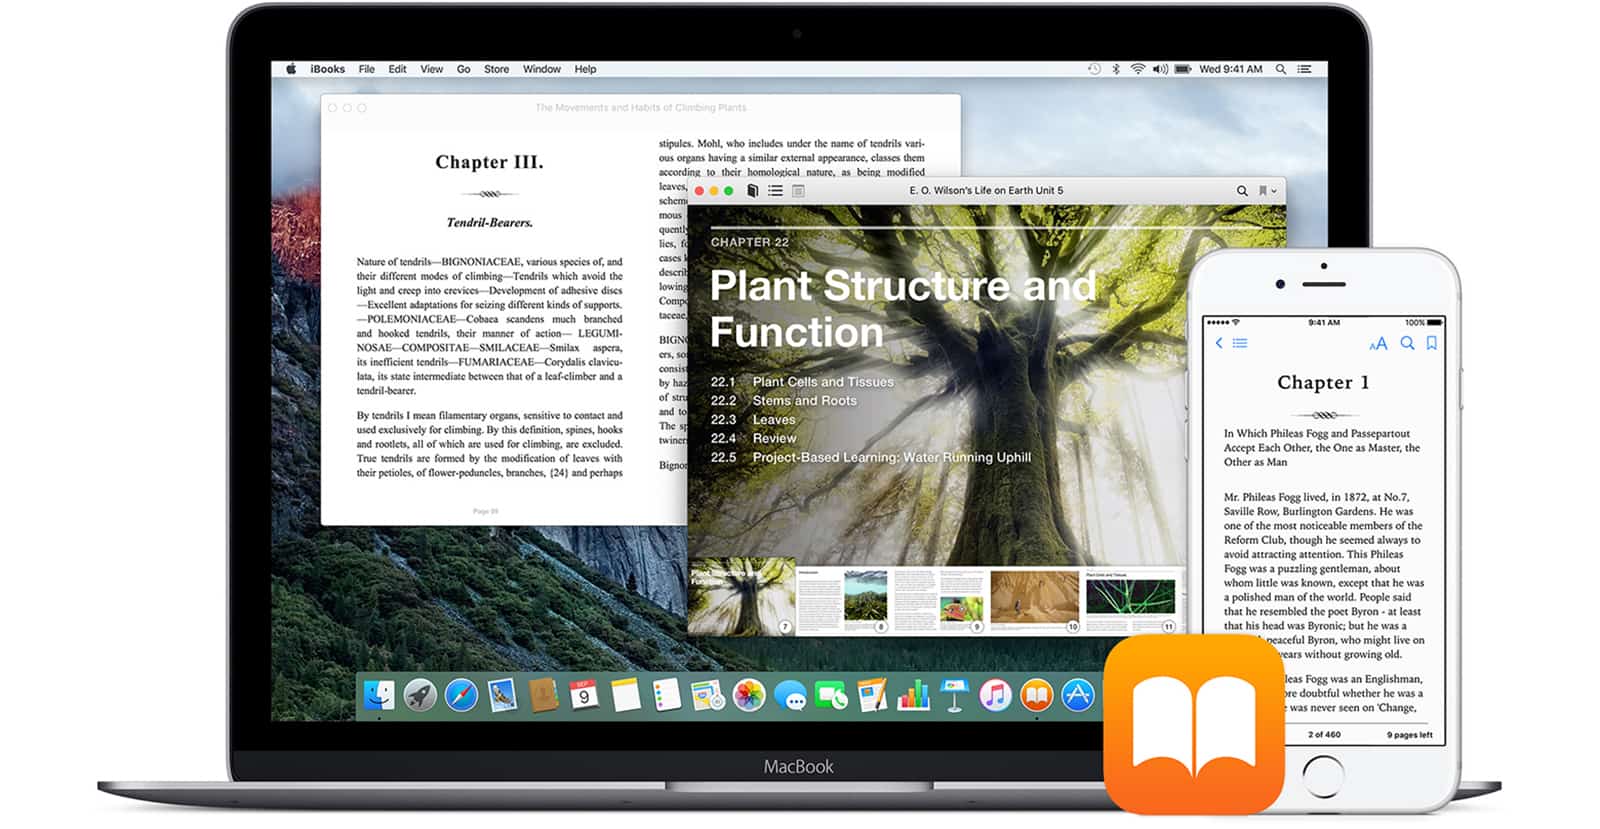 Self Publish Your Books With iBooks